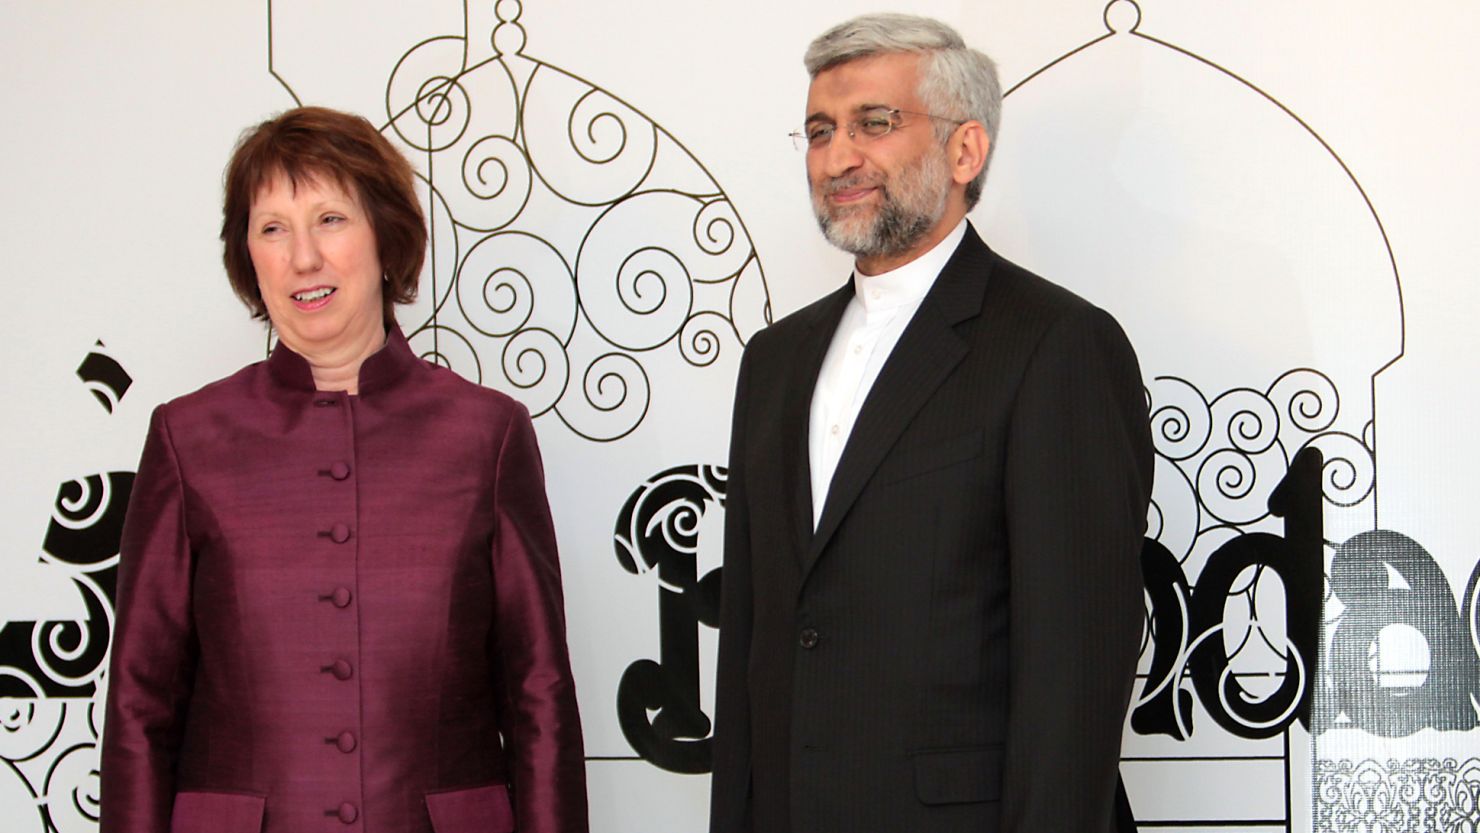 Iran's chief nuclear negotiator, Saeed Jalili, right, poses with EU foreign policy head Catherine Ashton.